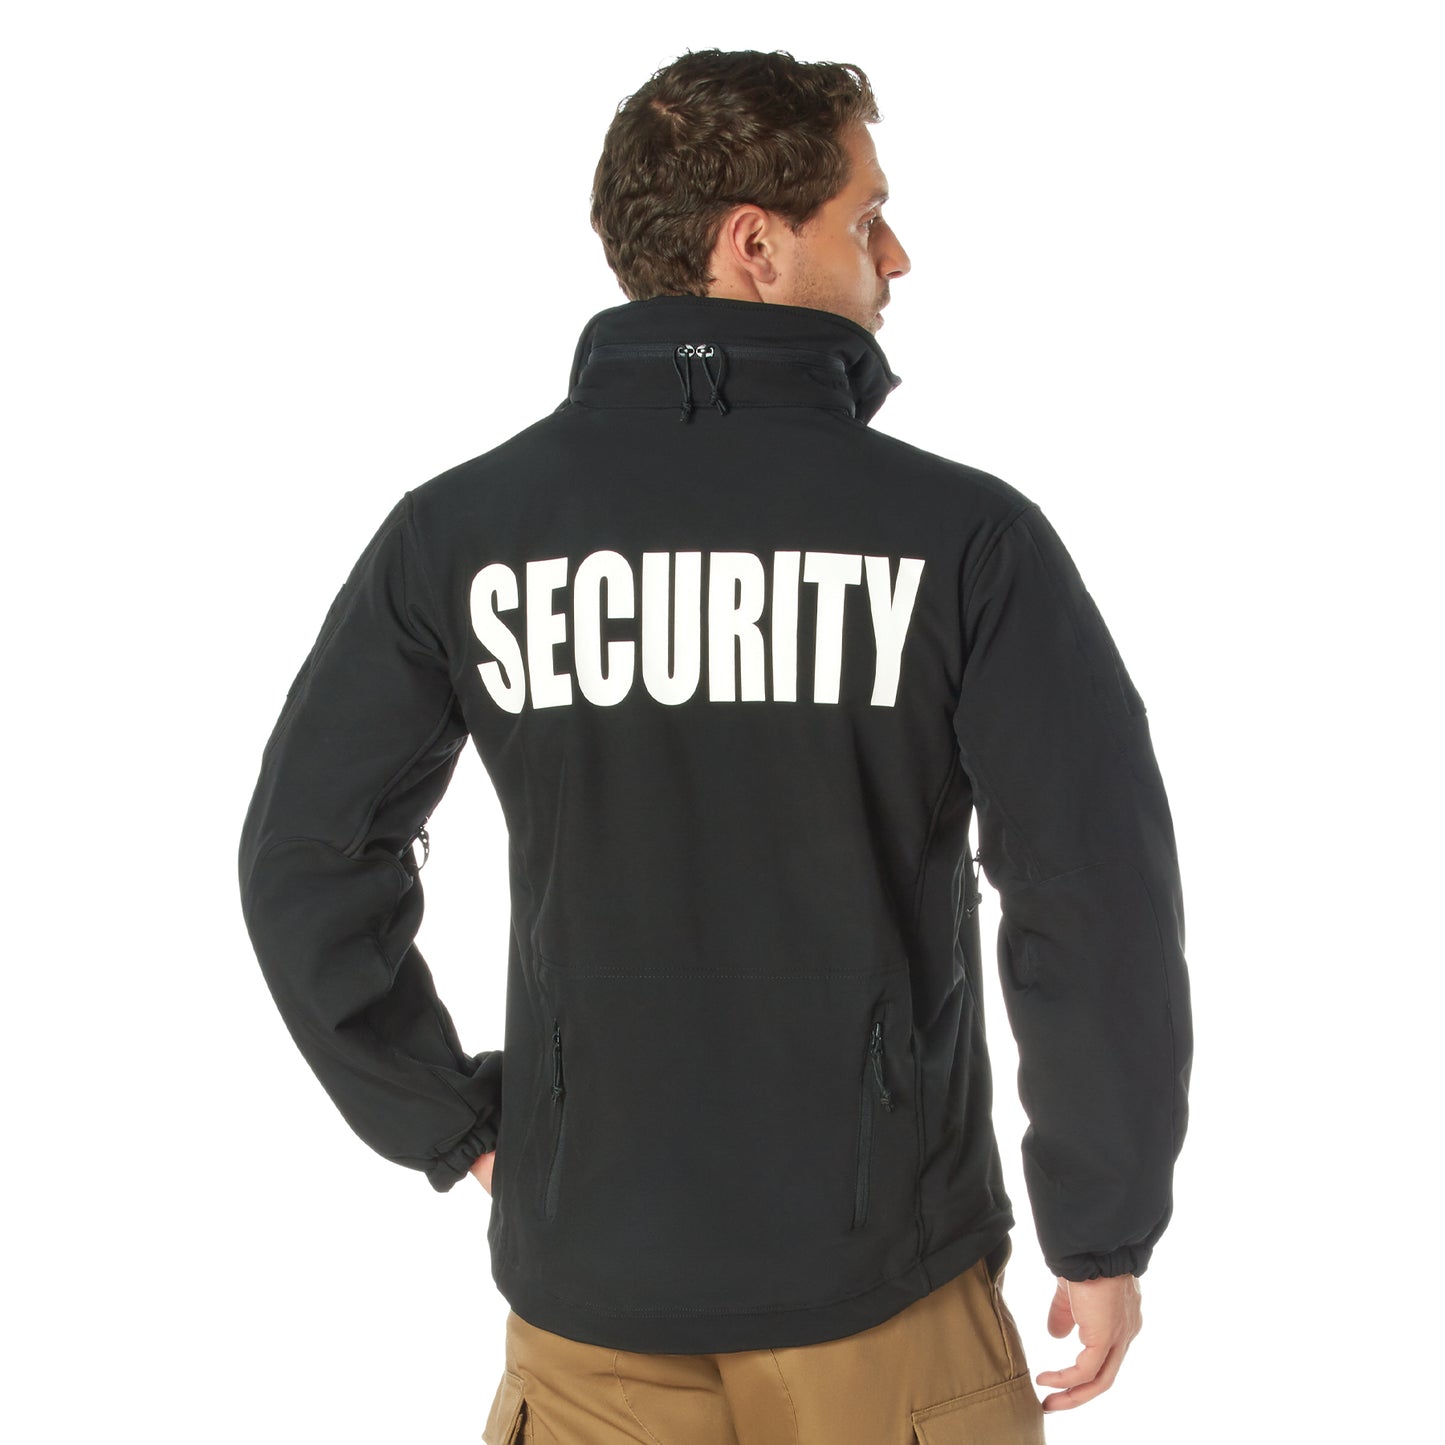 Rothco Spec Ops Soft Shell Security Jacket